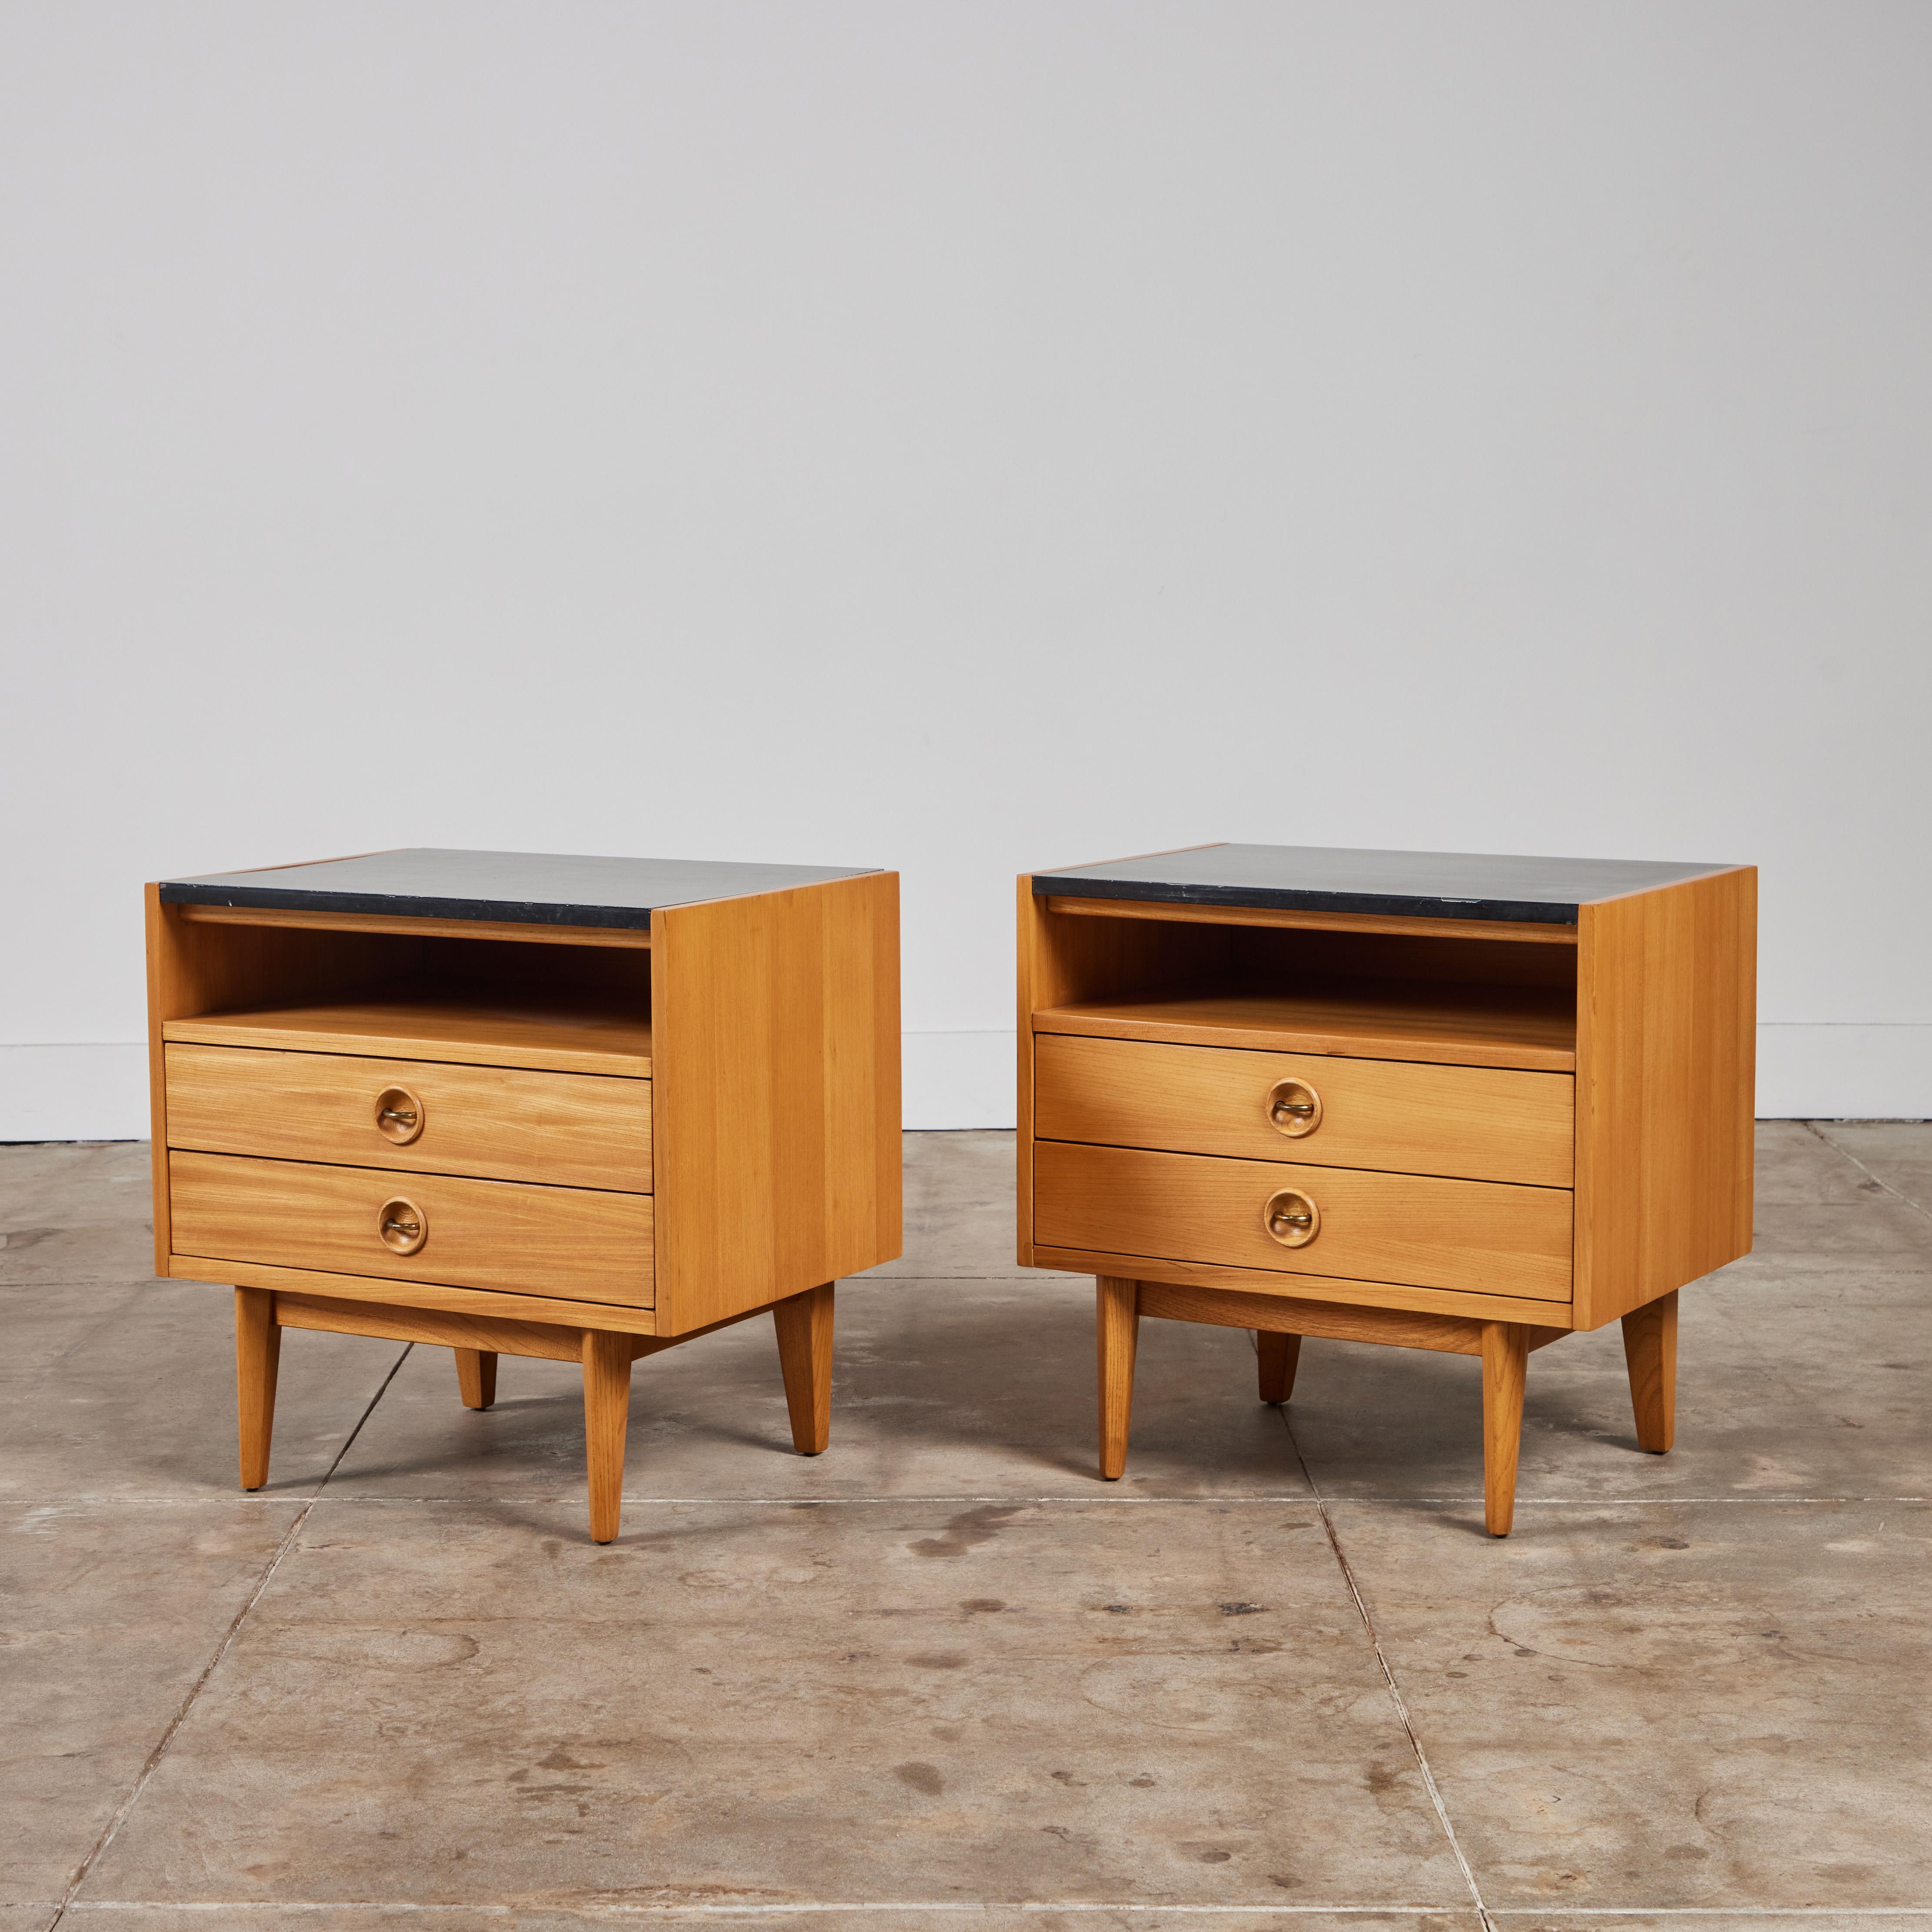 Pair of oak American of Martinsville night stands, c.1950s, USA. This minimal design features black laminate surface, two drawers with curved brass drawer pulls and an open shelf between the table top and drawers. The nightstands rest upon slightly